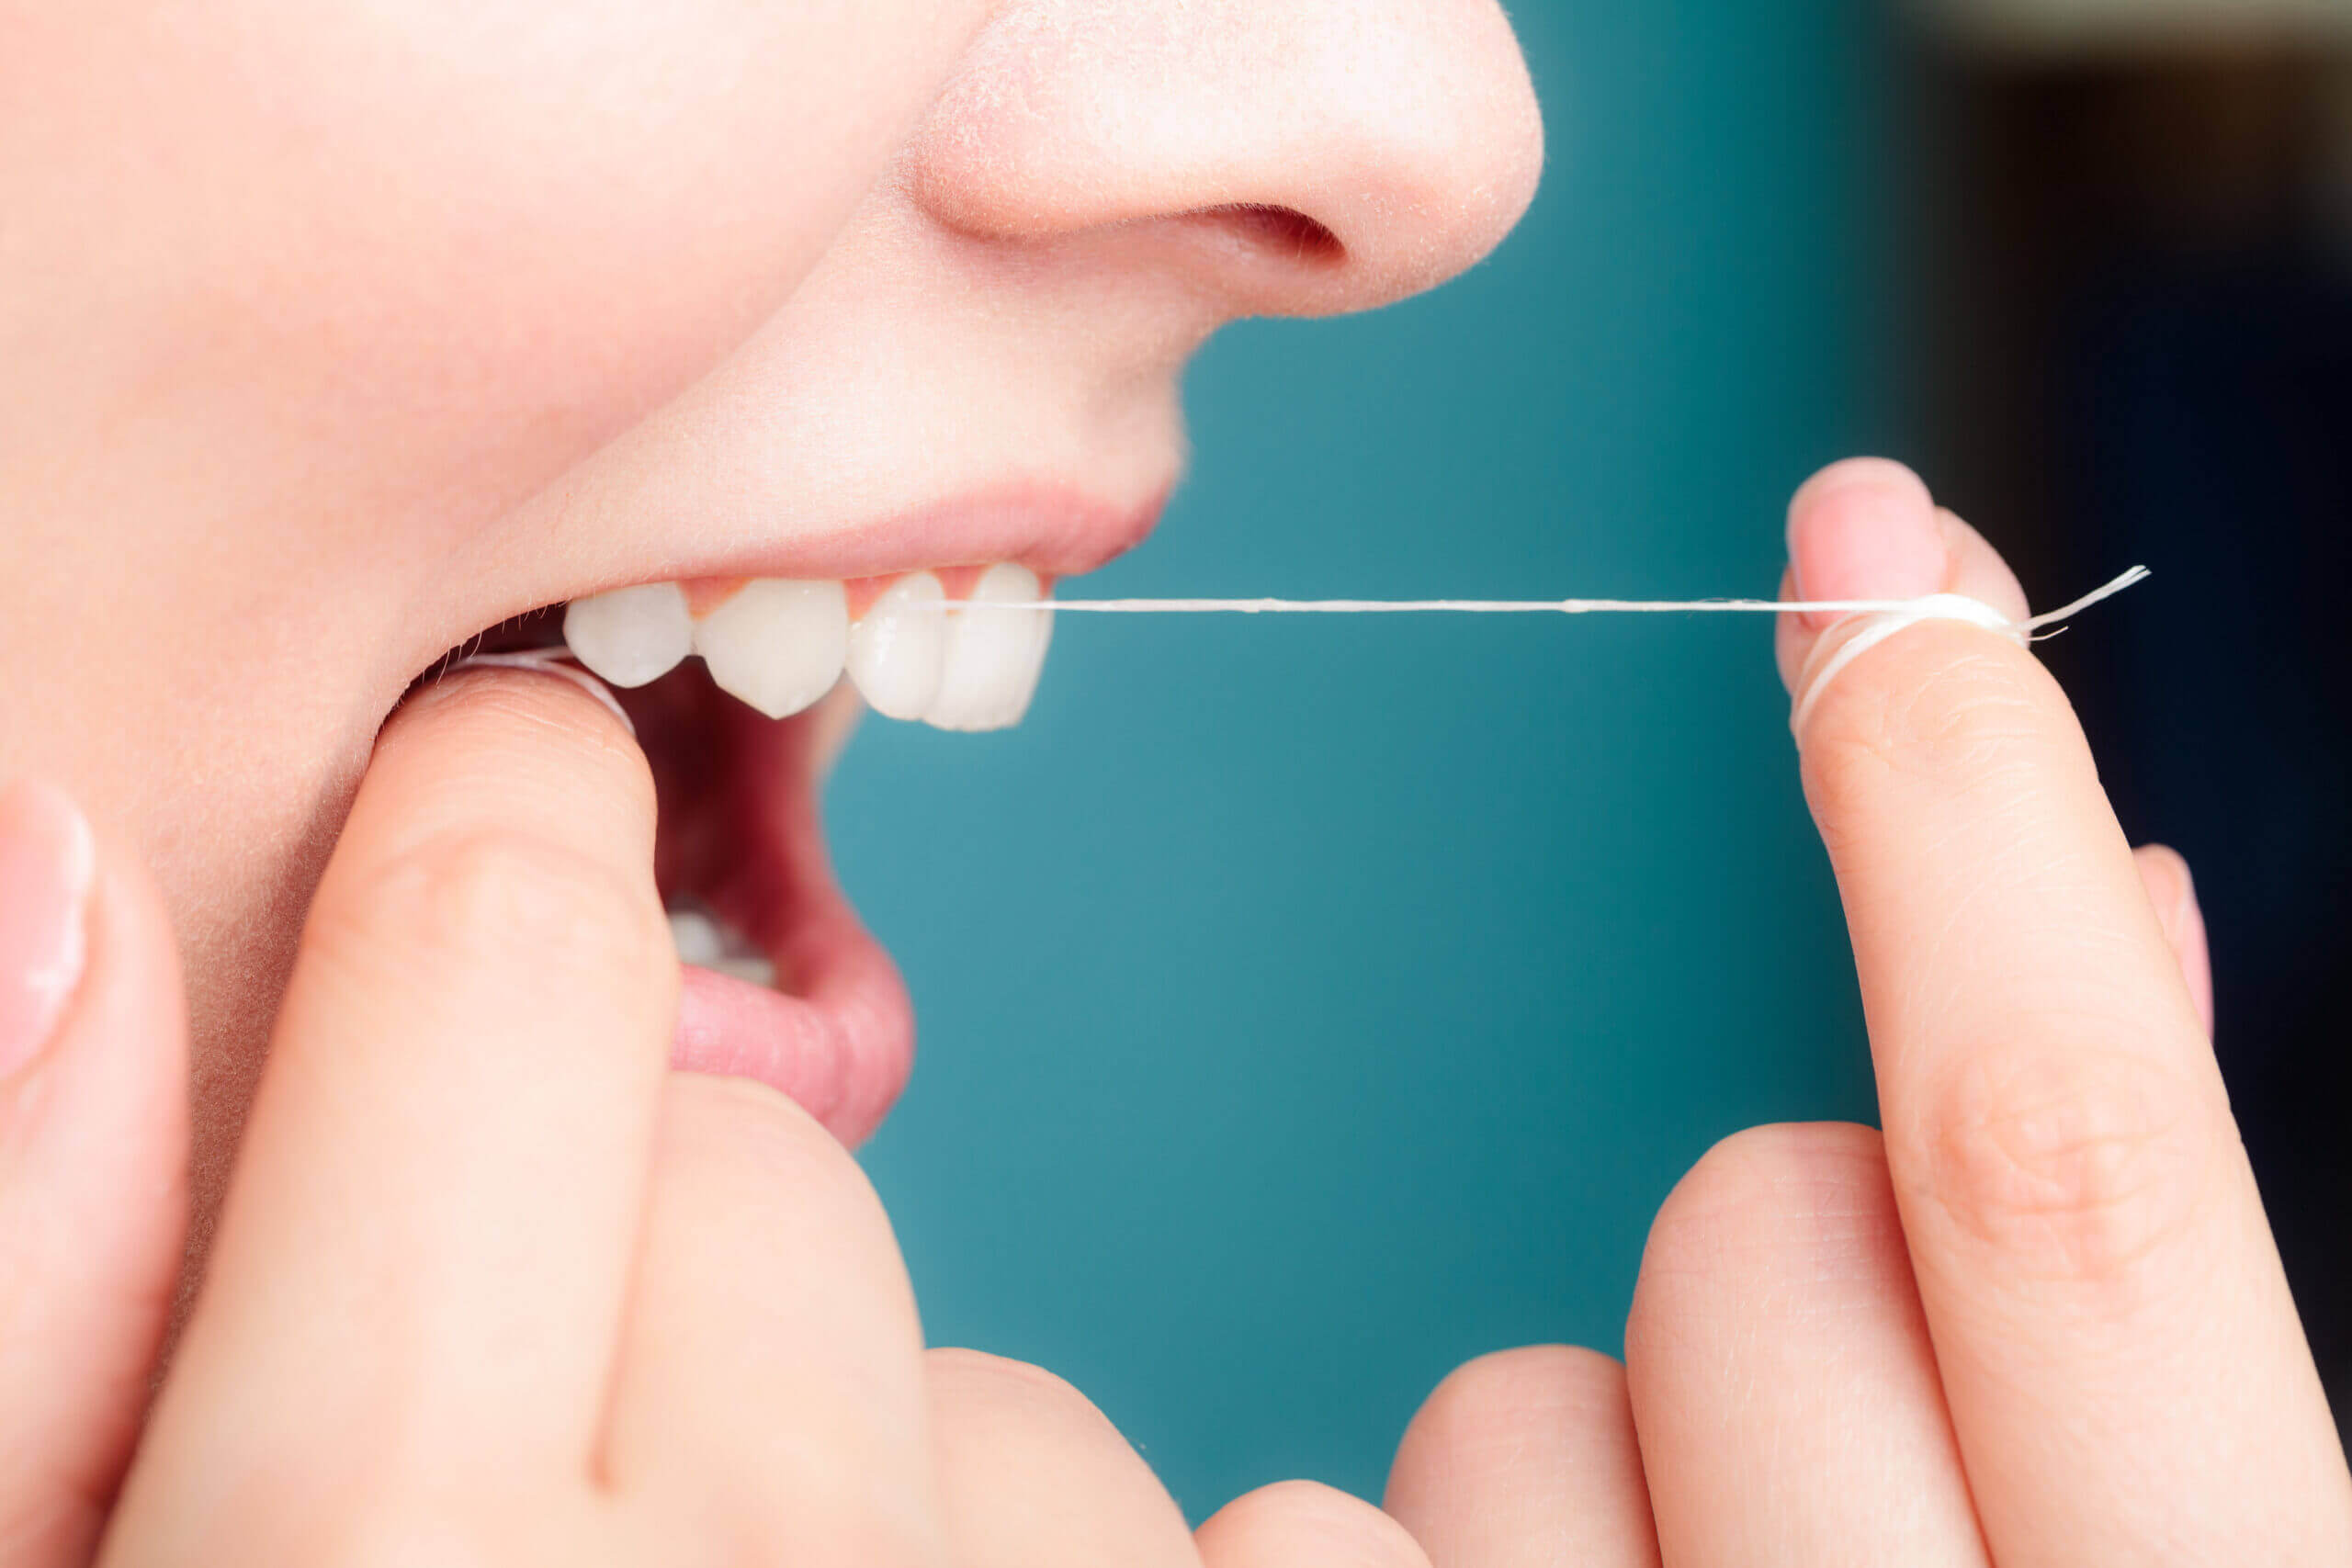 flossing Oral hygiene and health care. Smiling women use dental floss white healthy teeth.